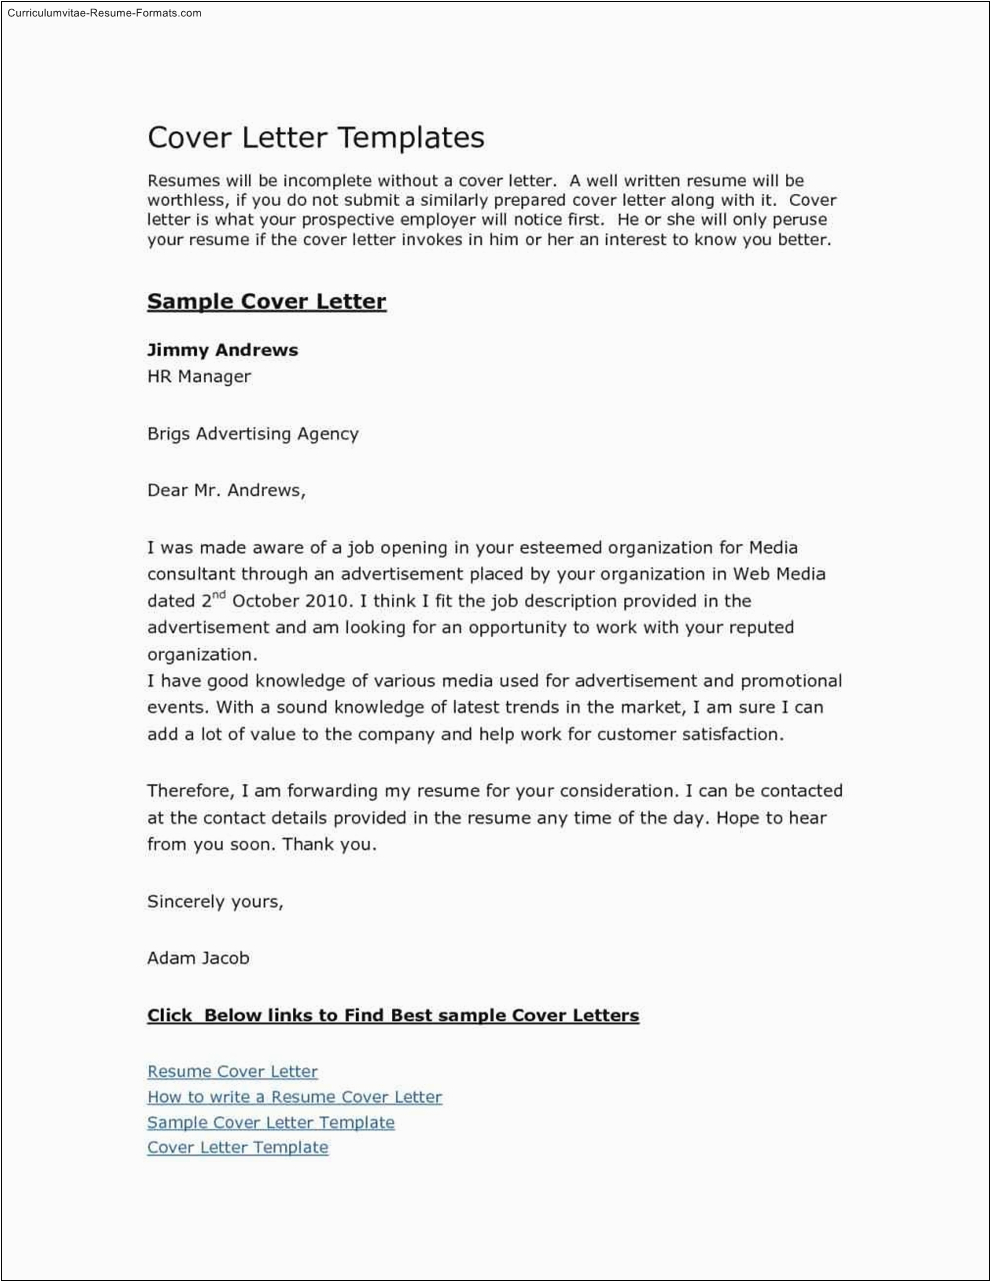 Free Download Sample Cover Letter for Resume Free Resume and Cover Letter Templates Downloads